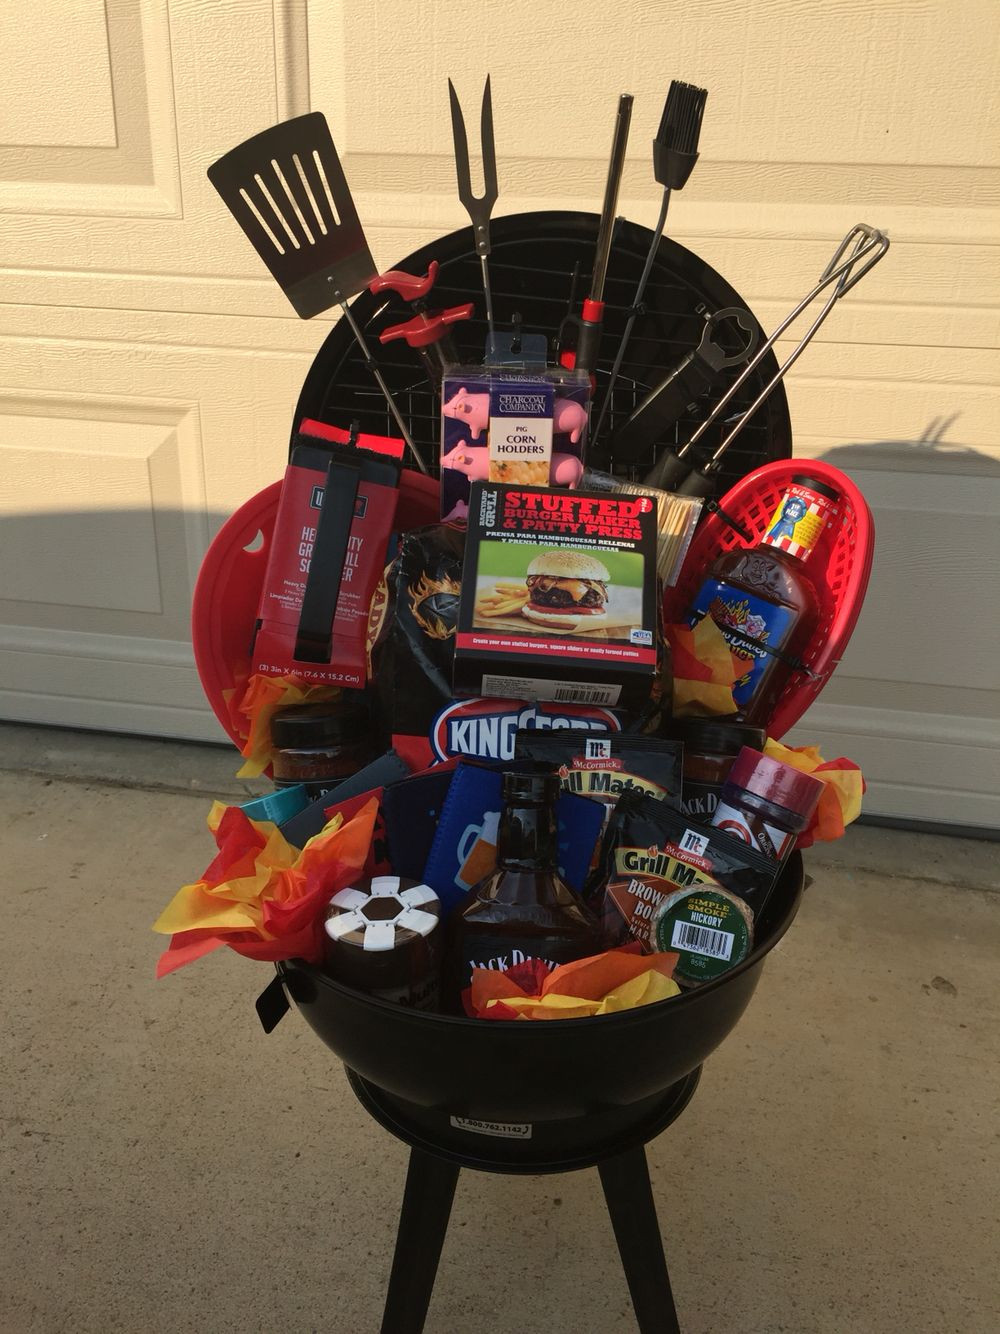 Barbeque Gift Basket Ideas
 My BBQ t basket …